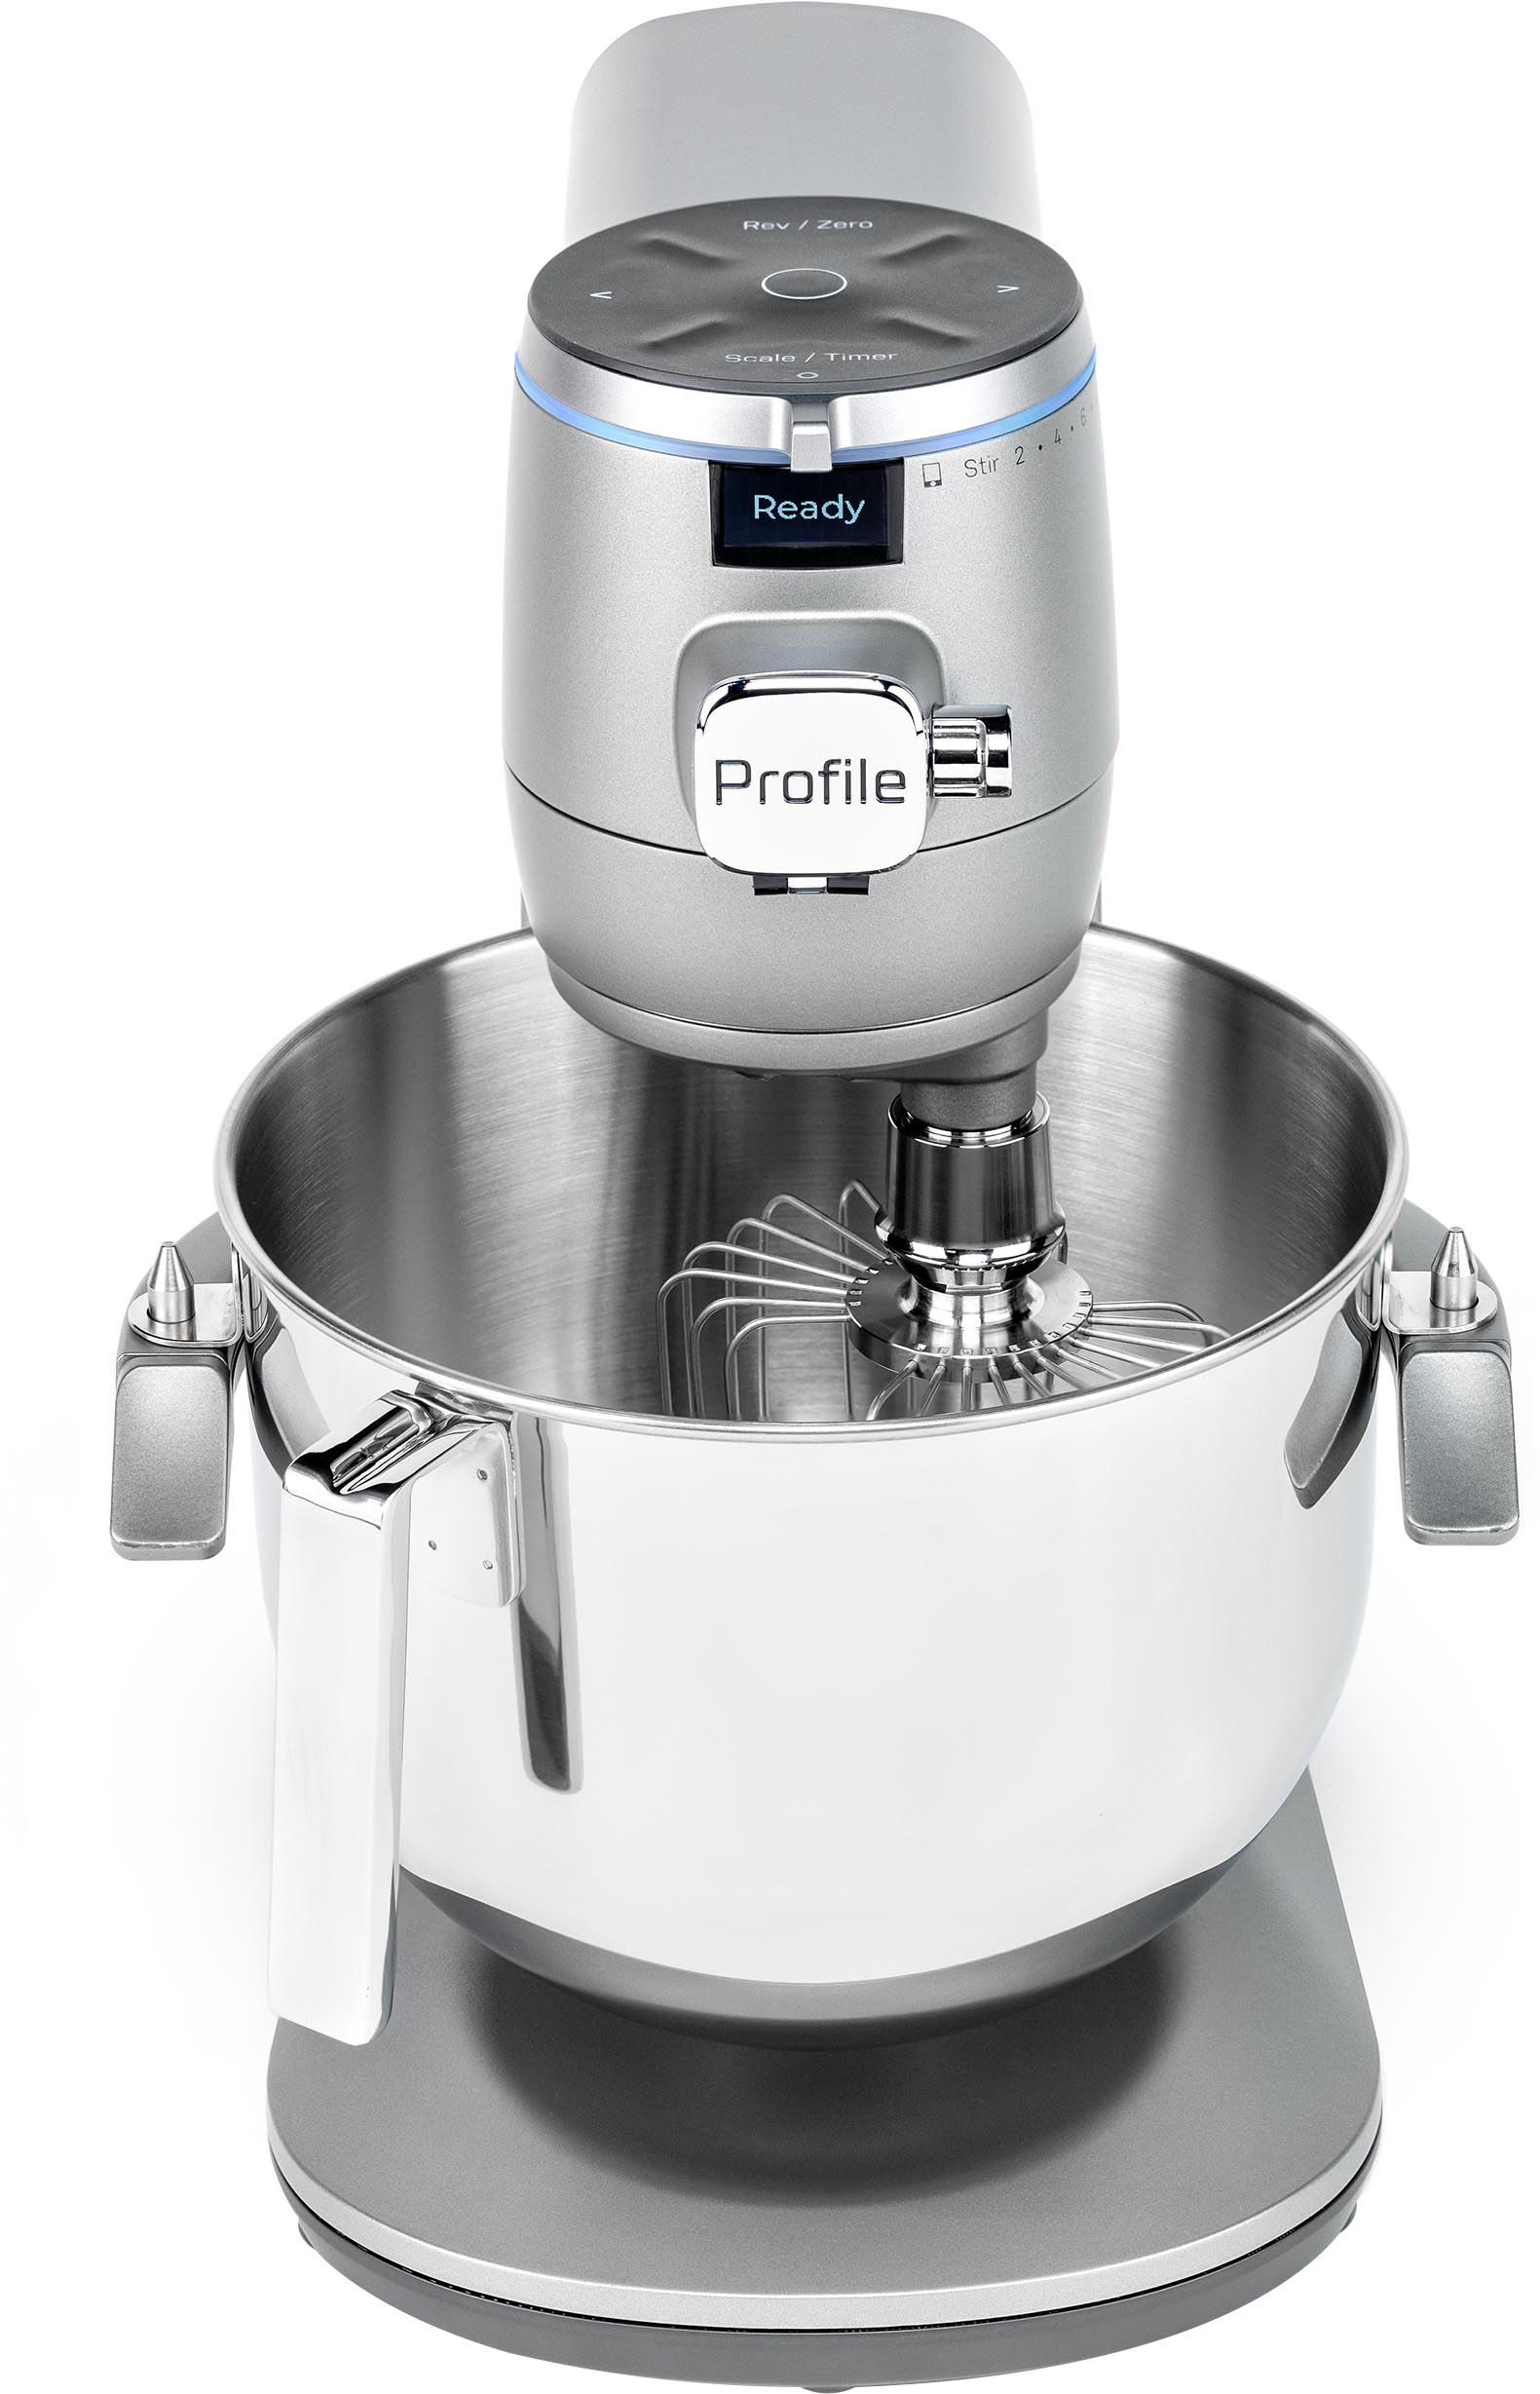 What's the Best Stand Mixer? GE Profile Smart Mixer Has Auto Sense Tech,  Scale - Bloomberg